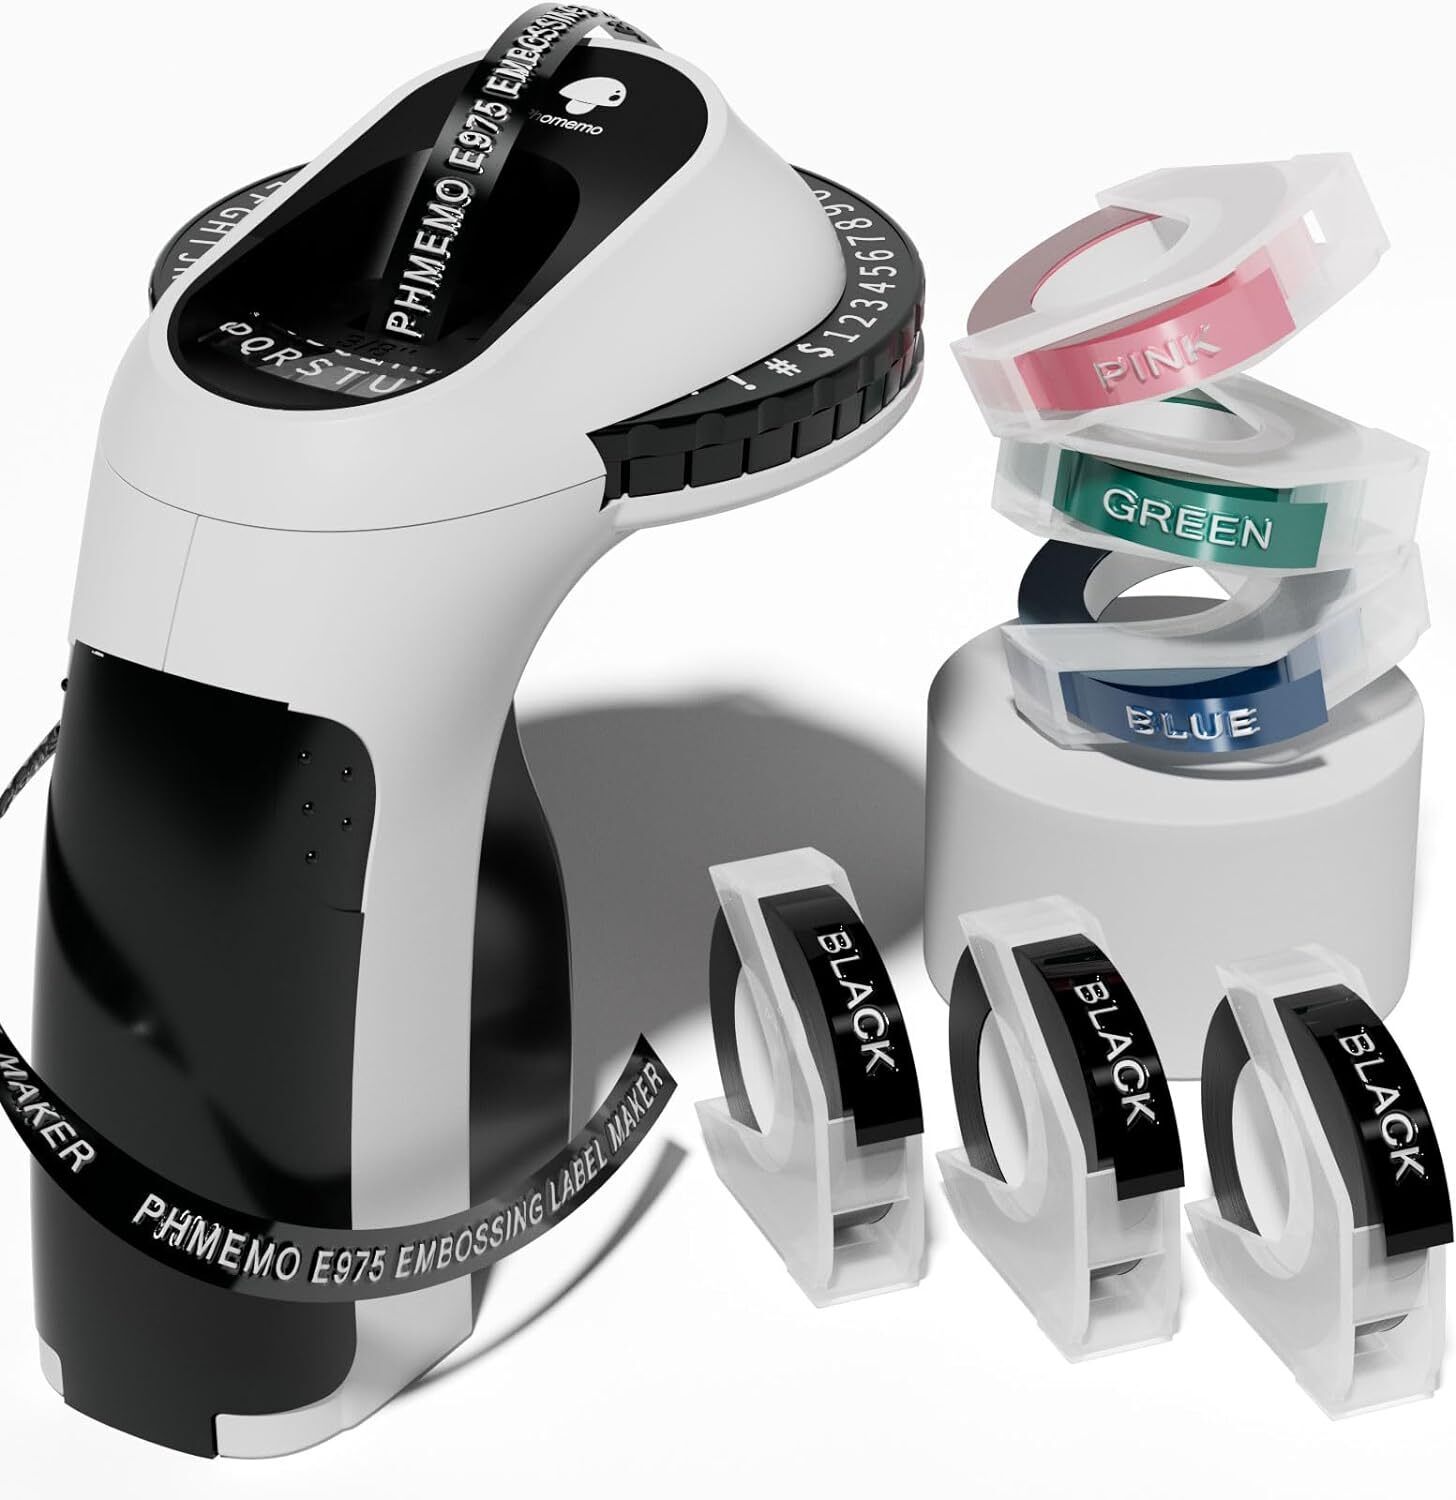 Dymo Embossing Label Maker with 5 Color Label Tapes 3/8\